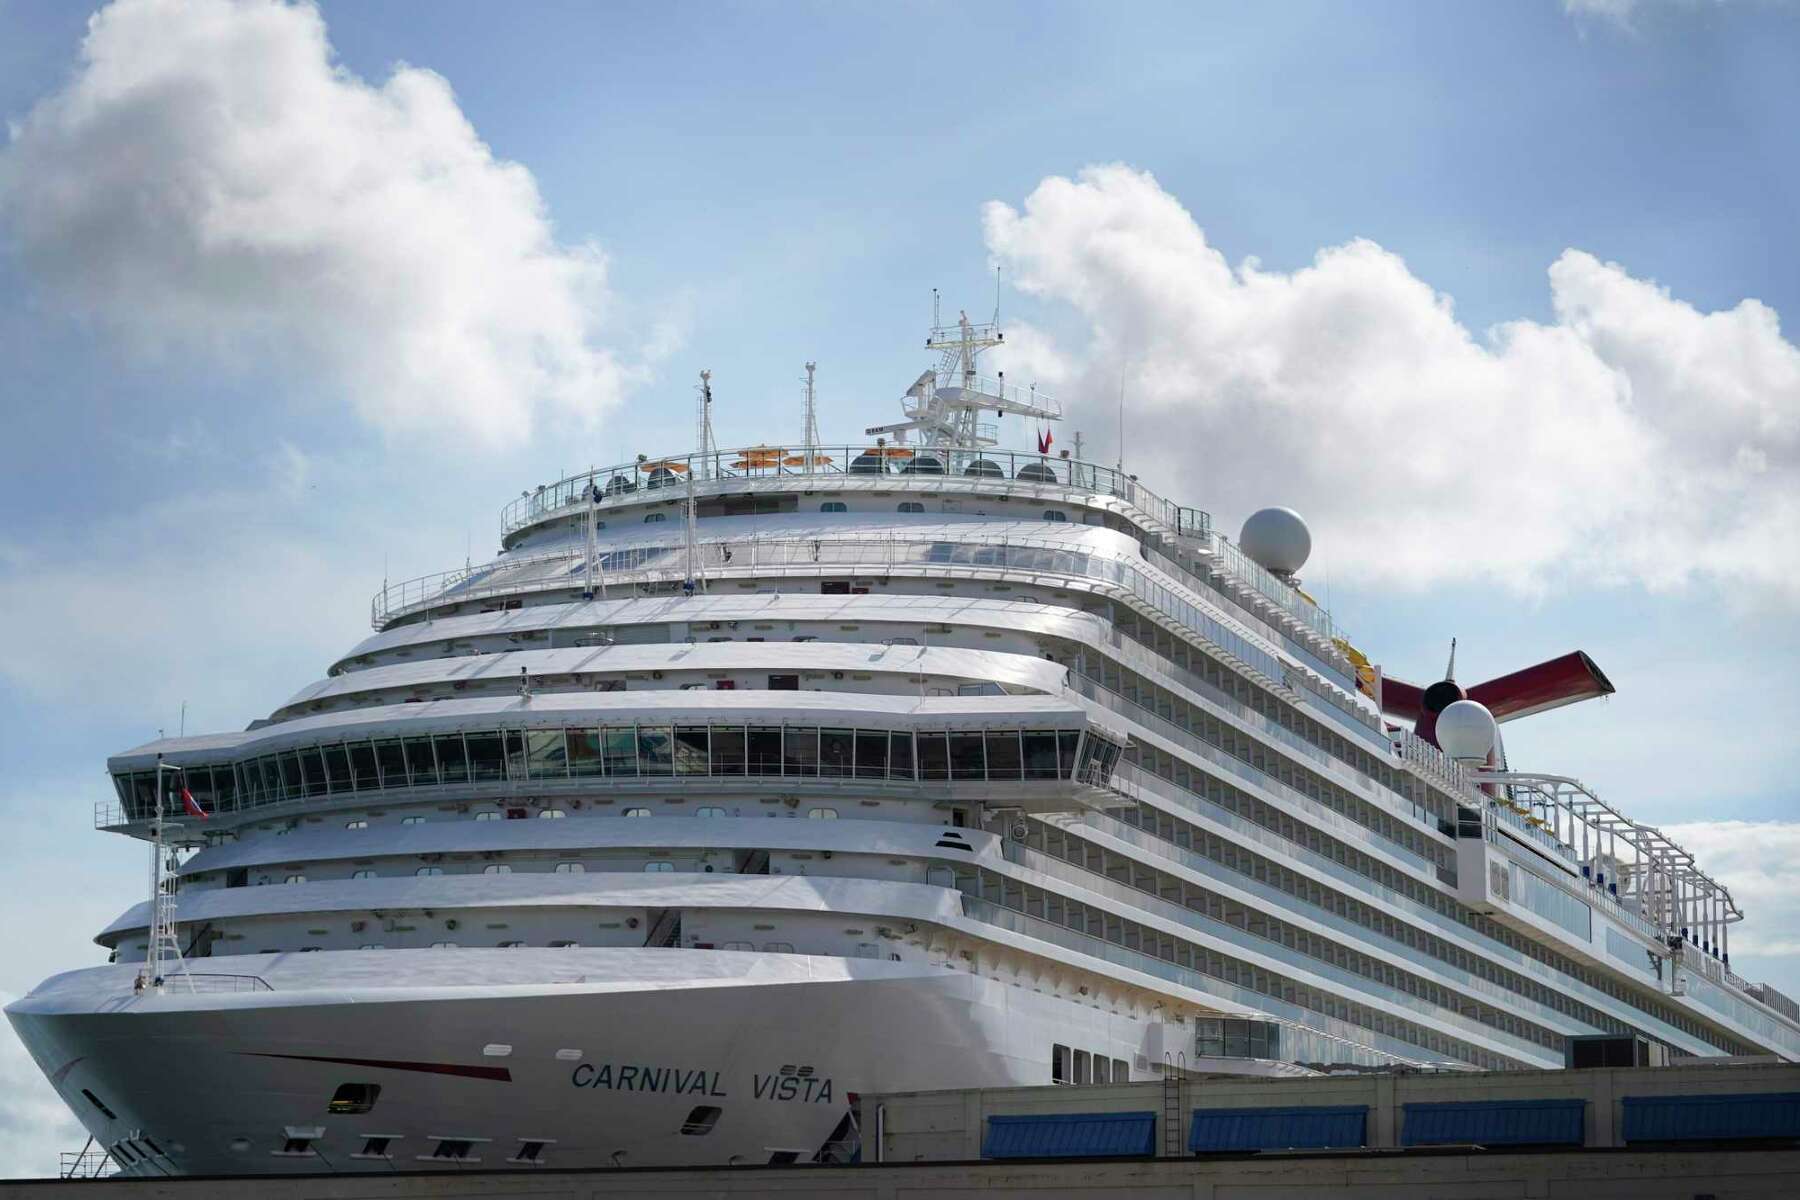 33+ Become connected with workers on cruise ships info